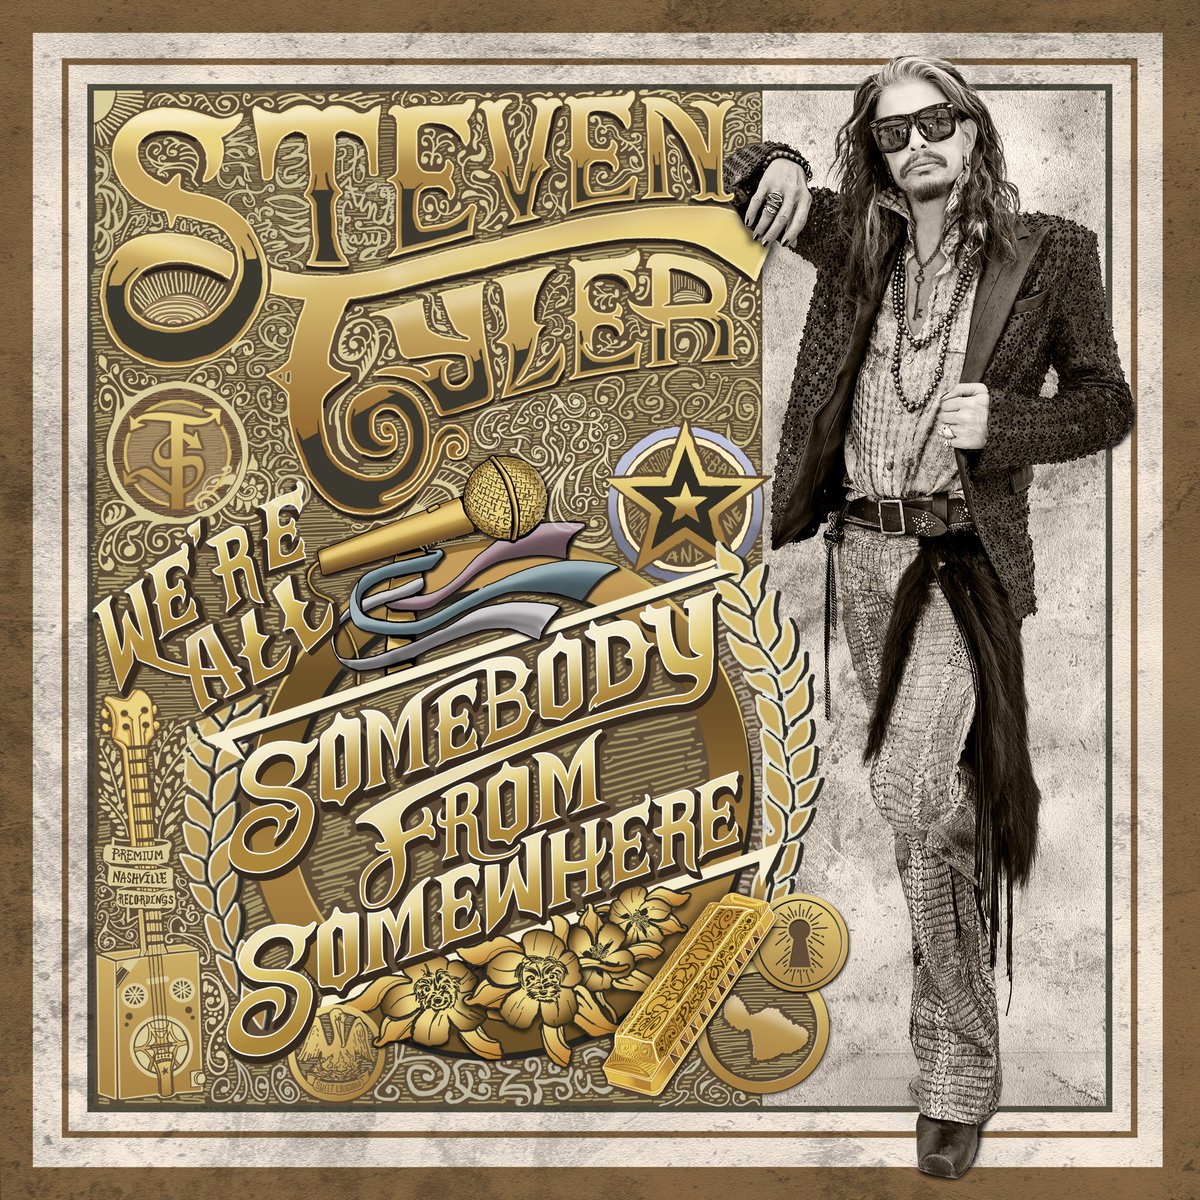 I READ THE NEWS TODAY ‘WE’RE ALL SOMEBODY FROM SOMEWHERE’ IS FOR SALE ON @GOOGLEPLAY
>>> https://t.co/3XsZfaT3m1 https://t.co/DZKanQ9vg9